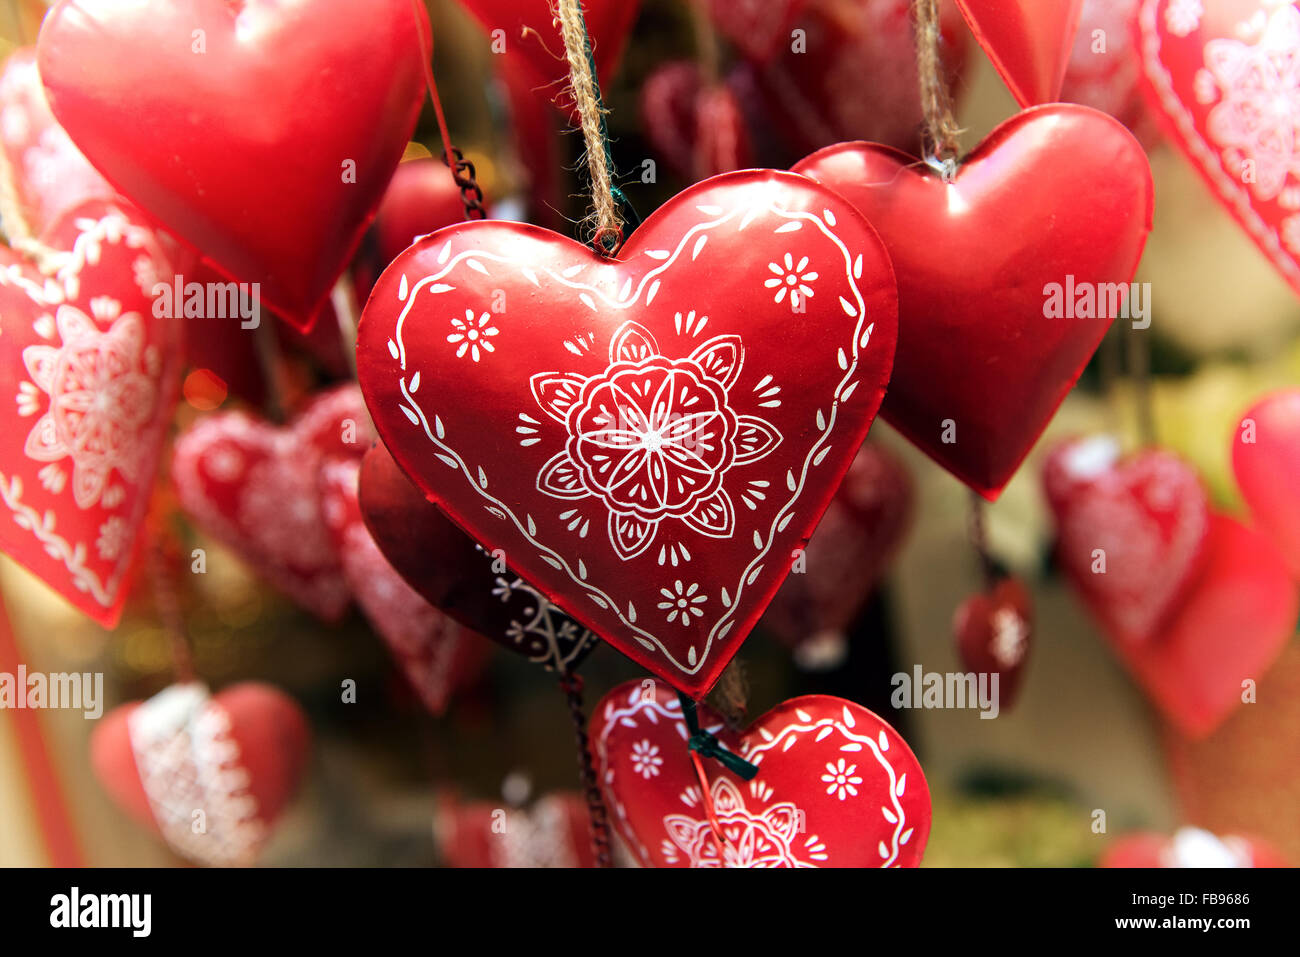 Hanging red decorated metal hearts symbolic of love and romance for Christmas, anniversary or Valentines Day, close up view Stock Photo